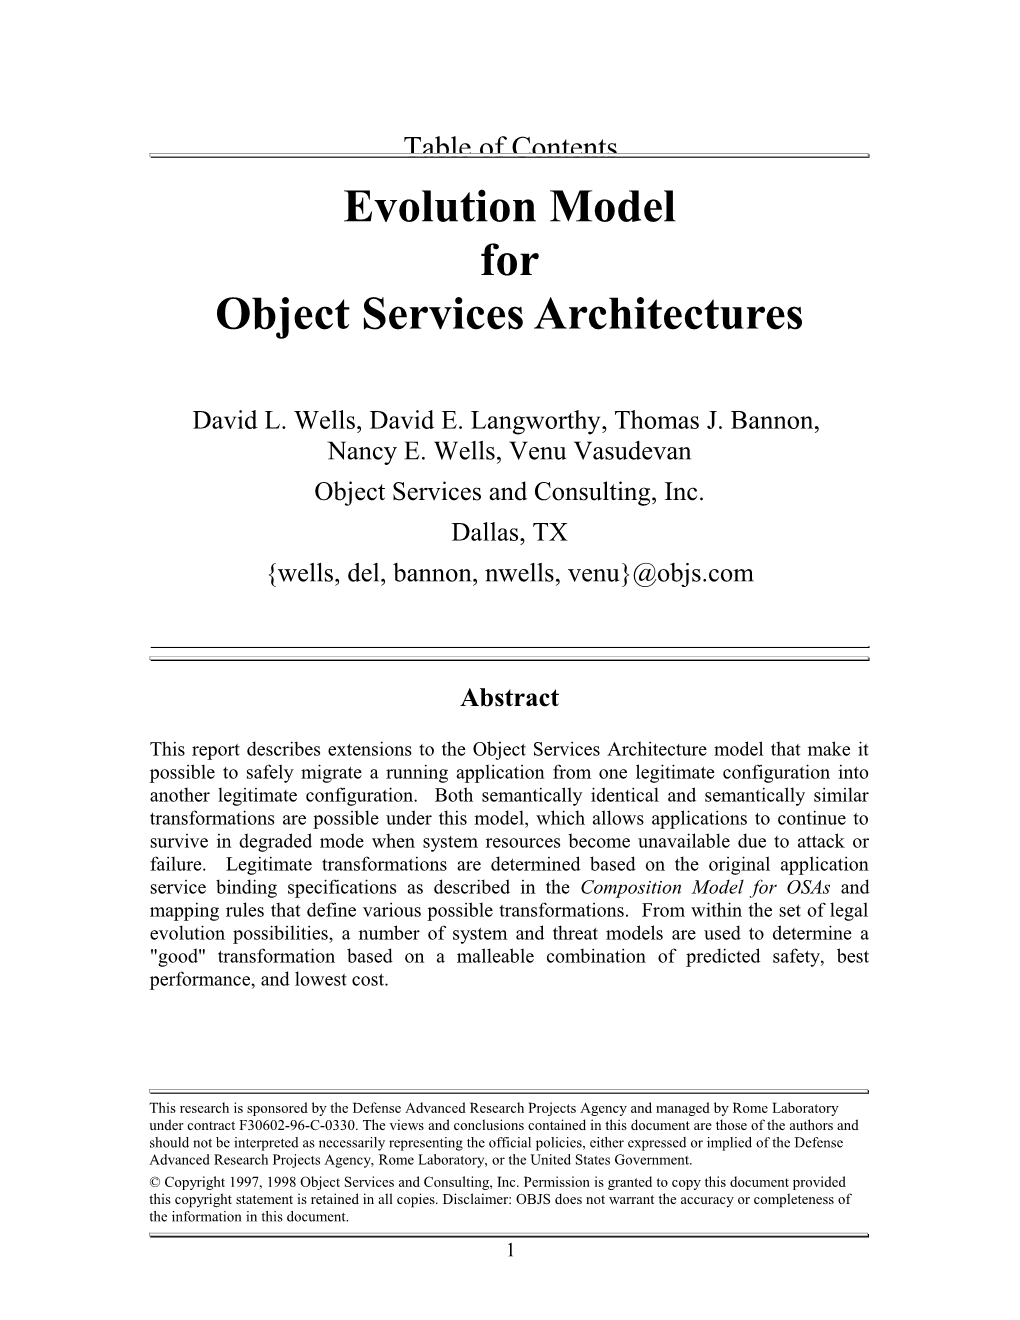 Evolution Model for Object Services Architectures